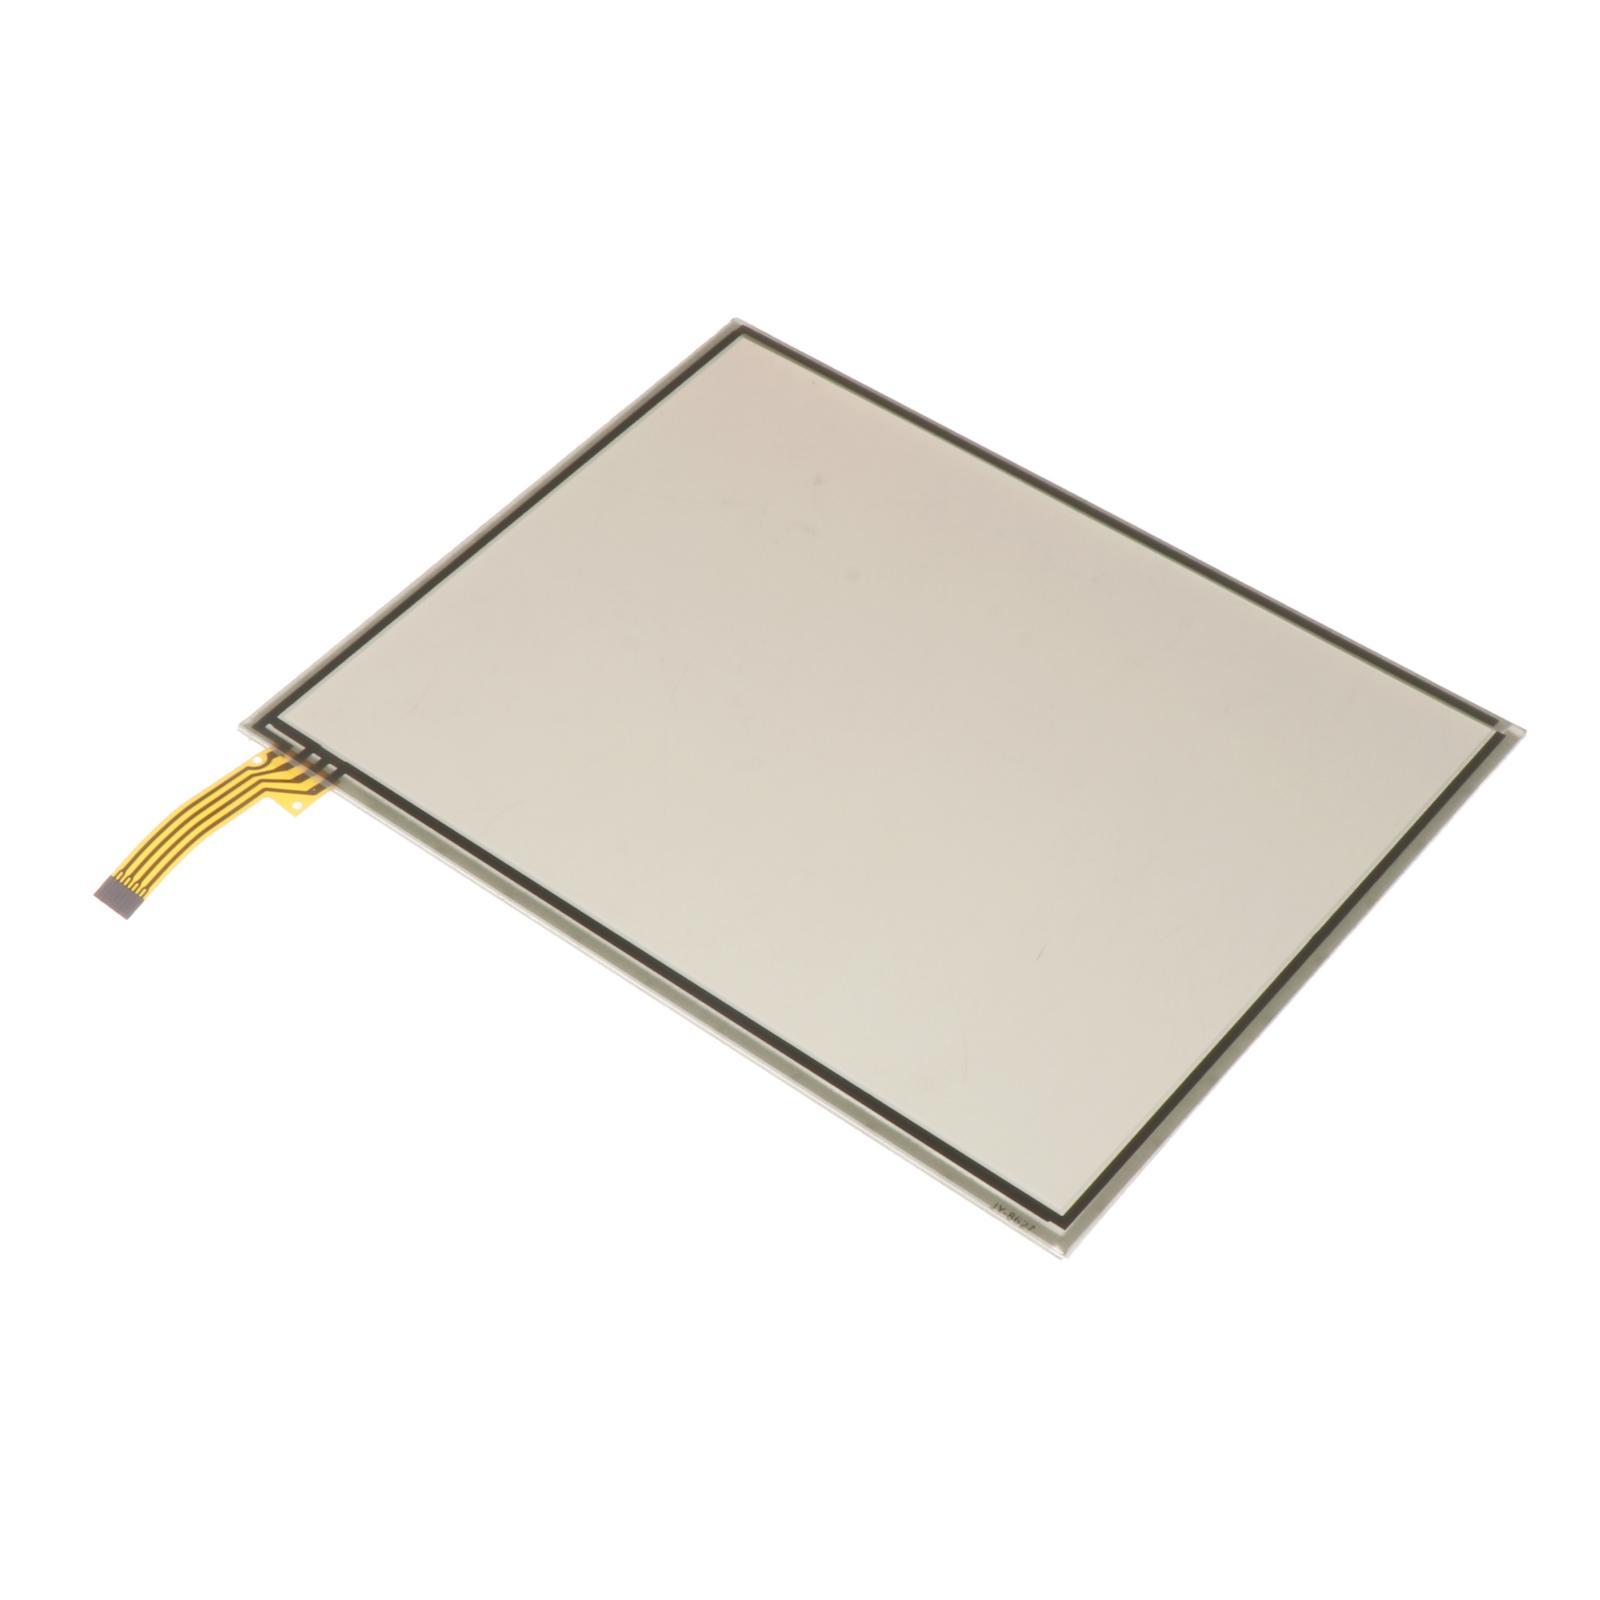 Touch Screen Glass Digitizer Fits For Uconnect 3C 8.4A VP3 8.4AN VP4 Radio